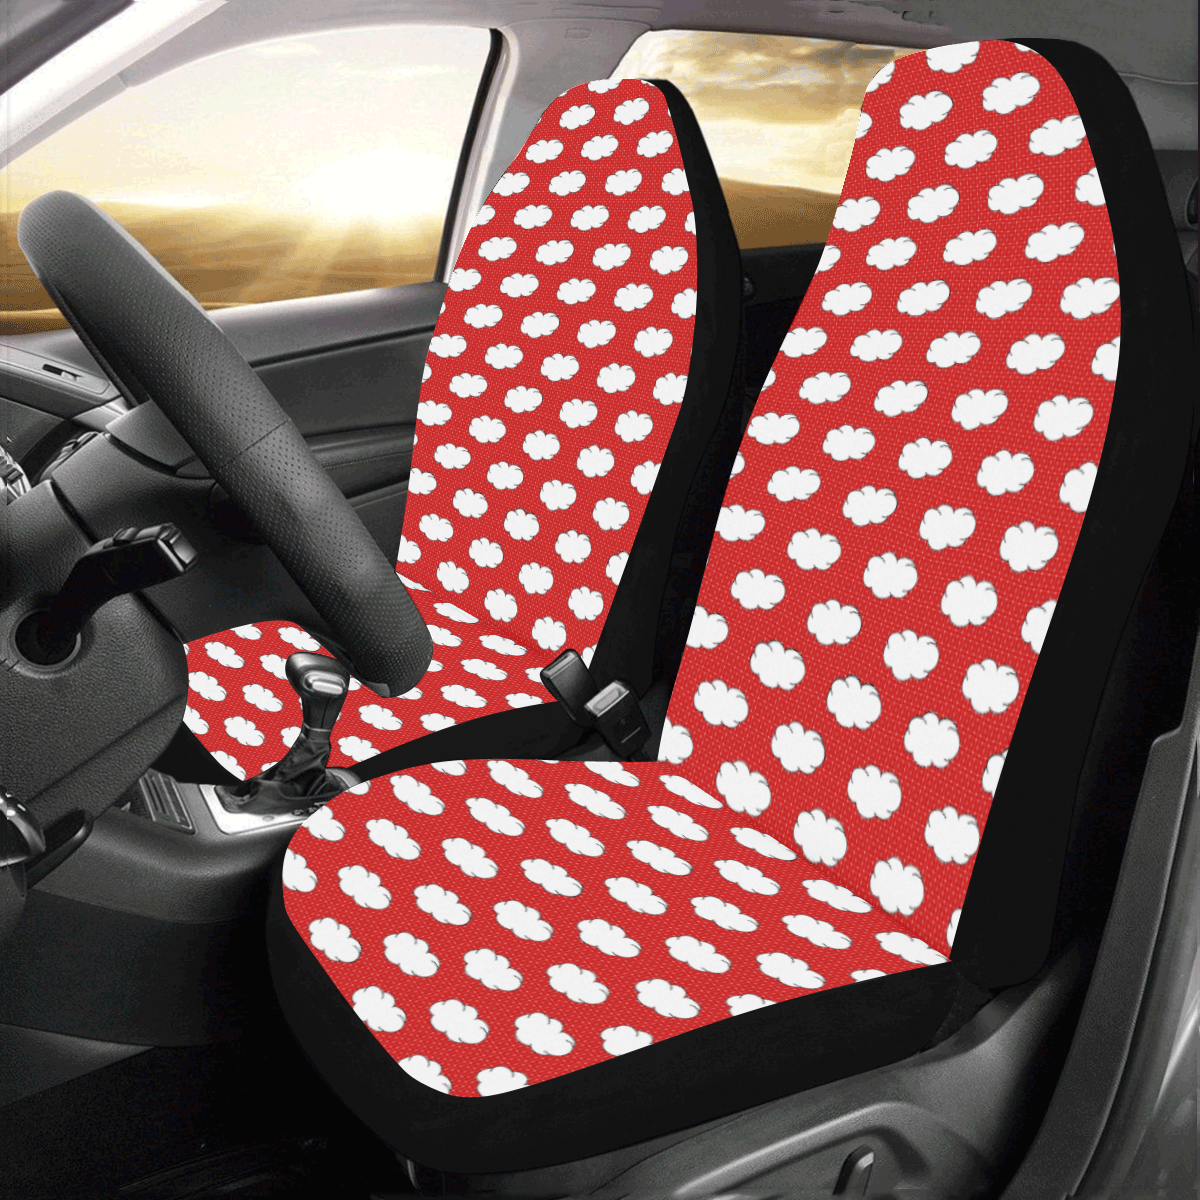 Clouds with Polka Dots on Red Car Seat Covers (Set of 2)